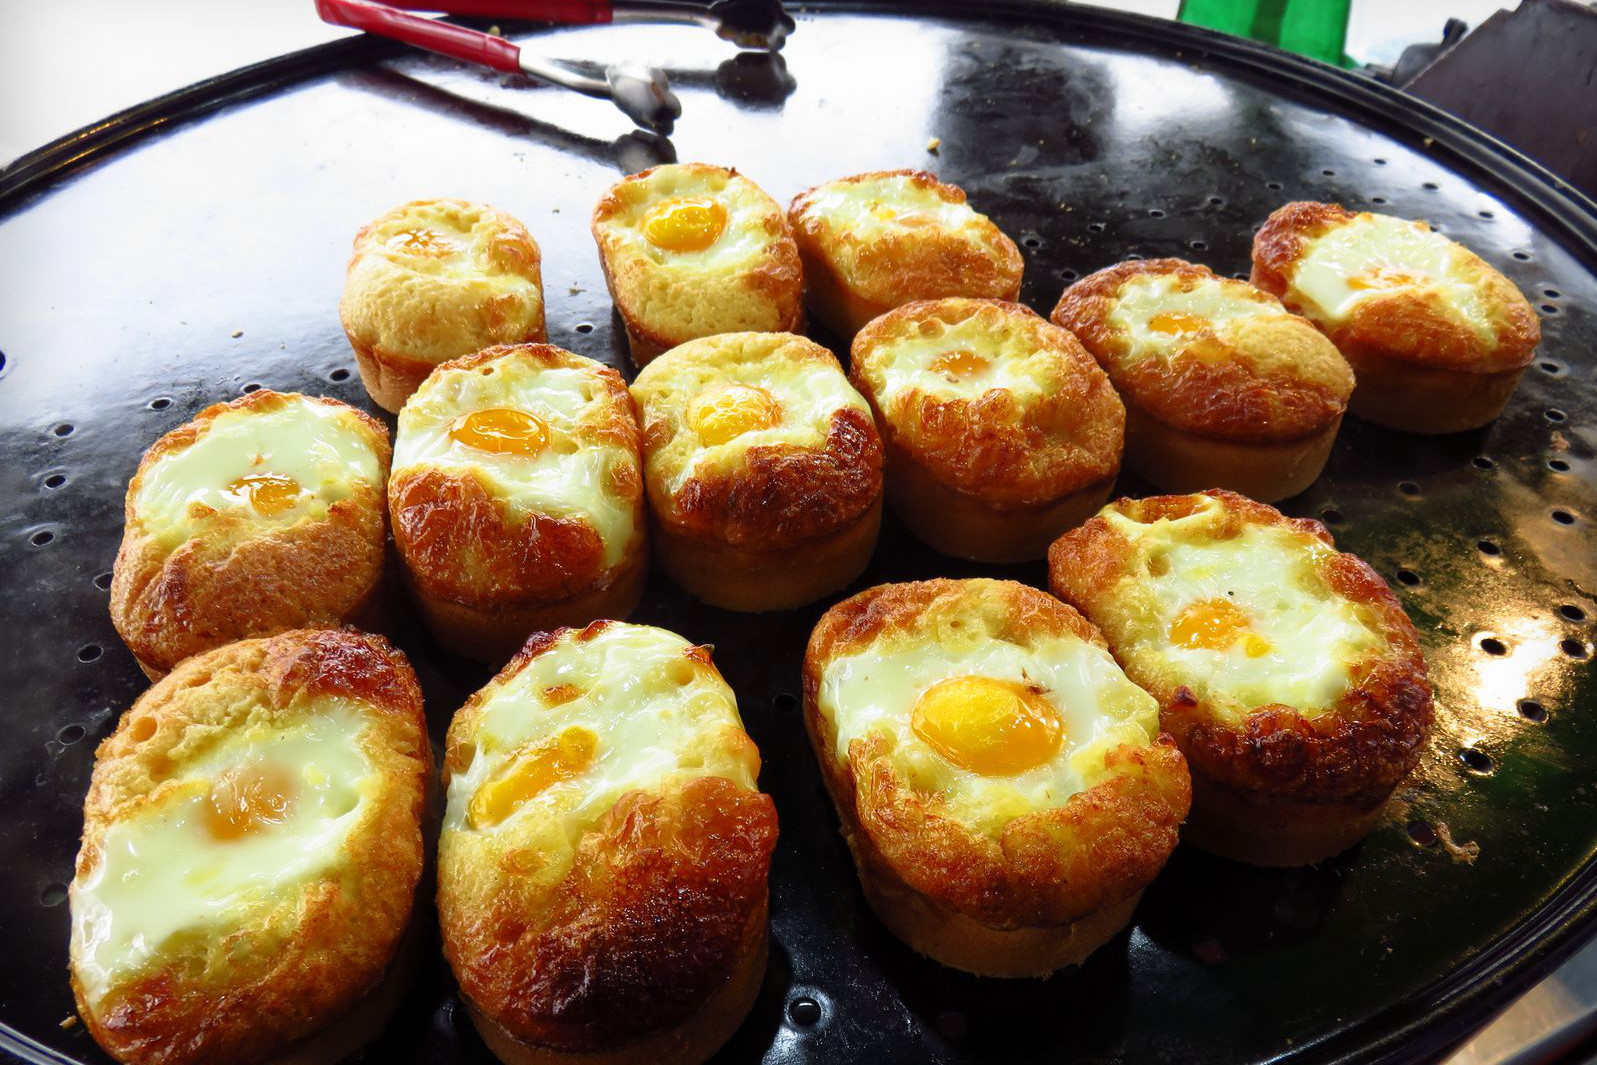 Fluffy egg muffins known as gyrenppang. Image by Phillip Tang / Lonely Planet